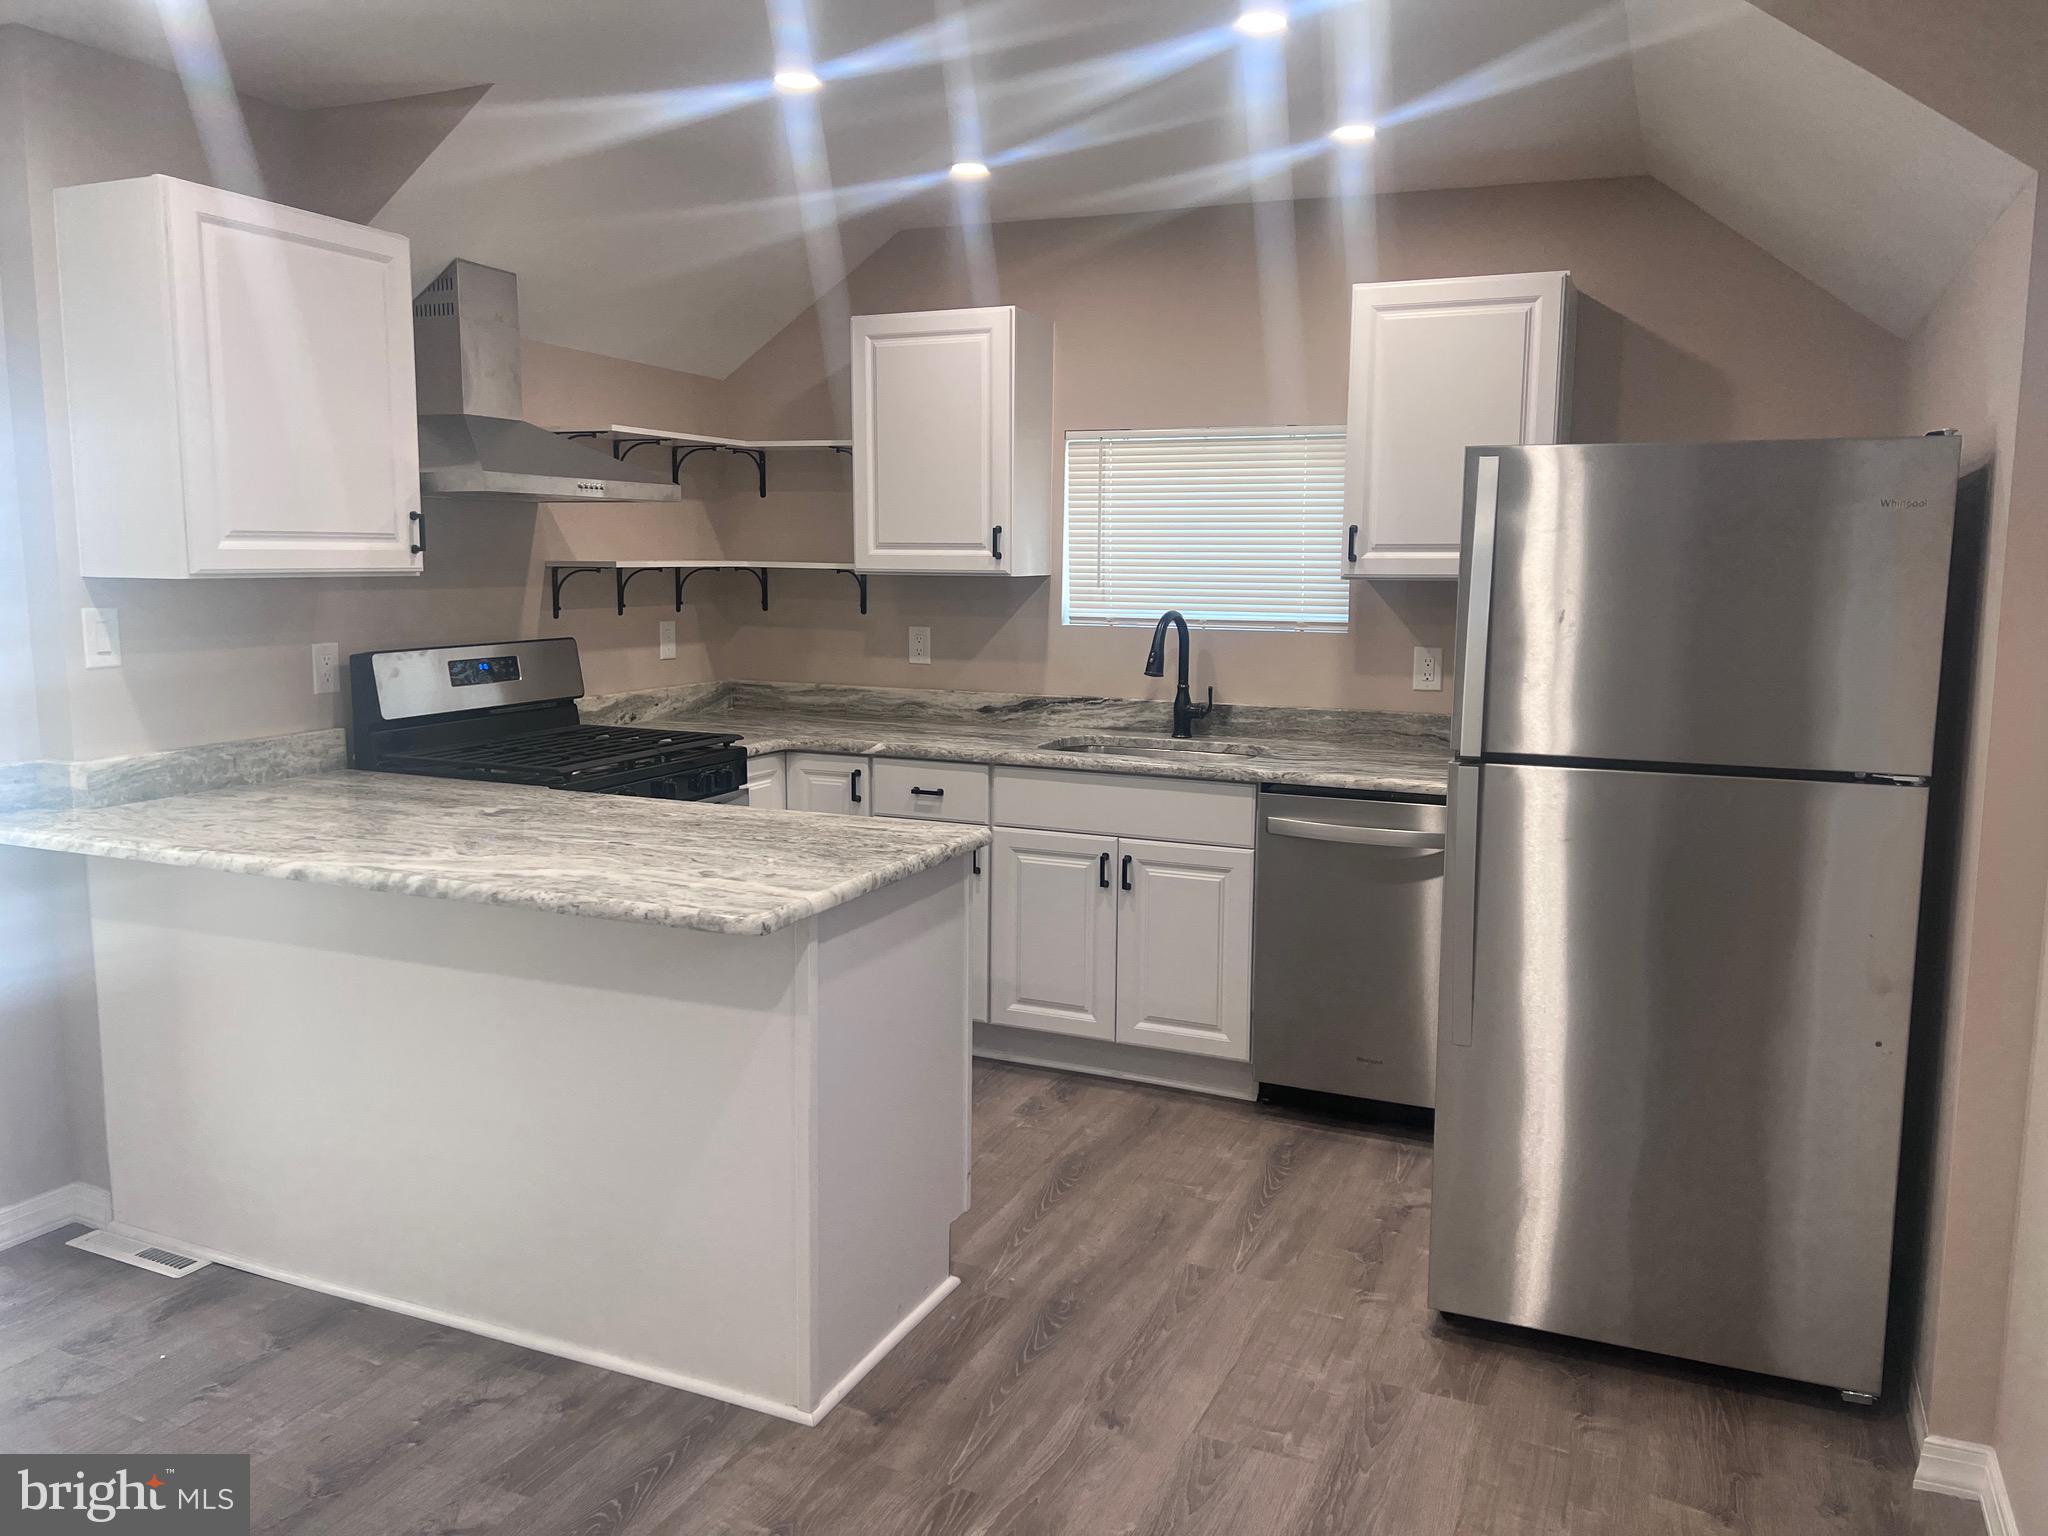 a kitchen with stainless steel appliances granite countertop a refrigerator a sink dishwasher a stove top oven a refrigerator with white cabinets and wooden floor